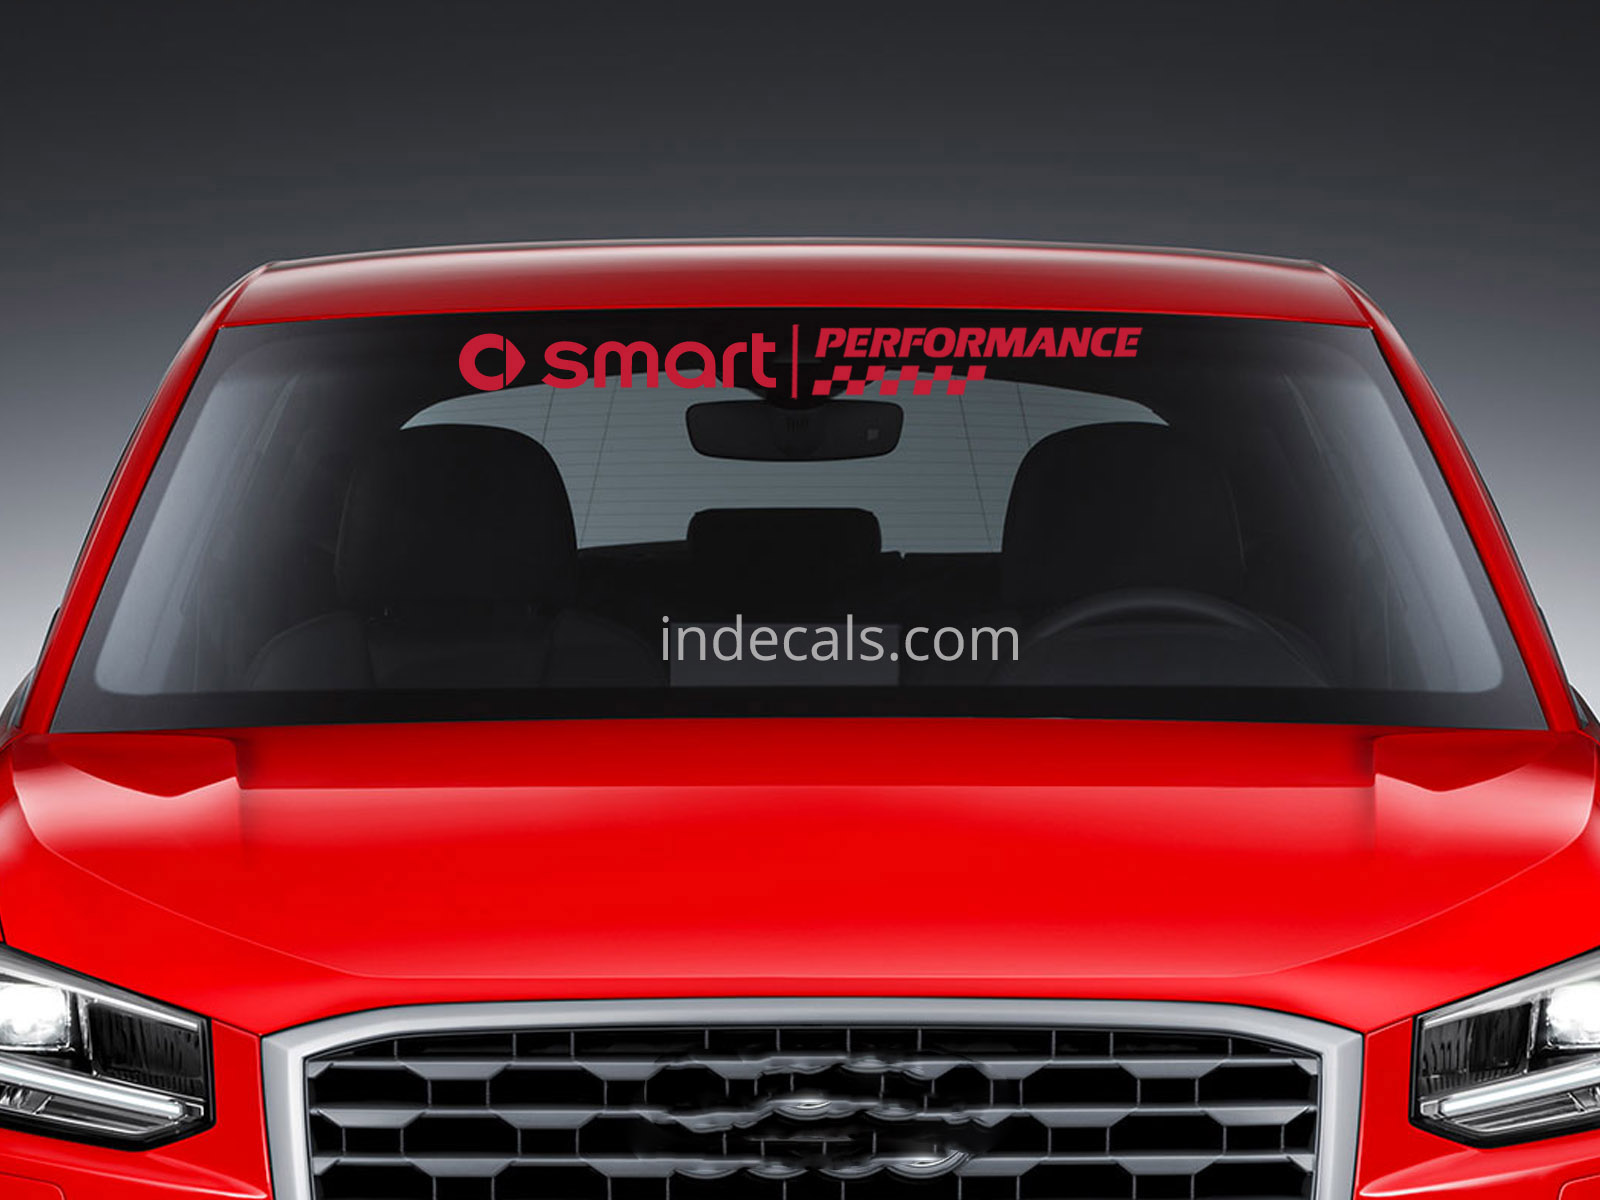 1 x Smart Performance Sticker for Windshield or Back Window - Red